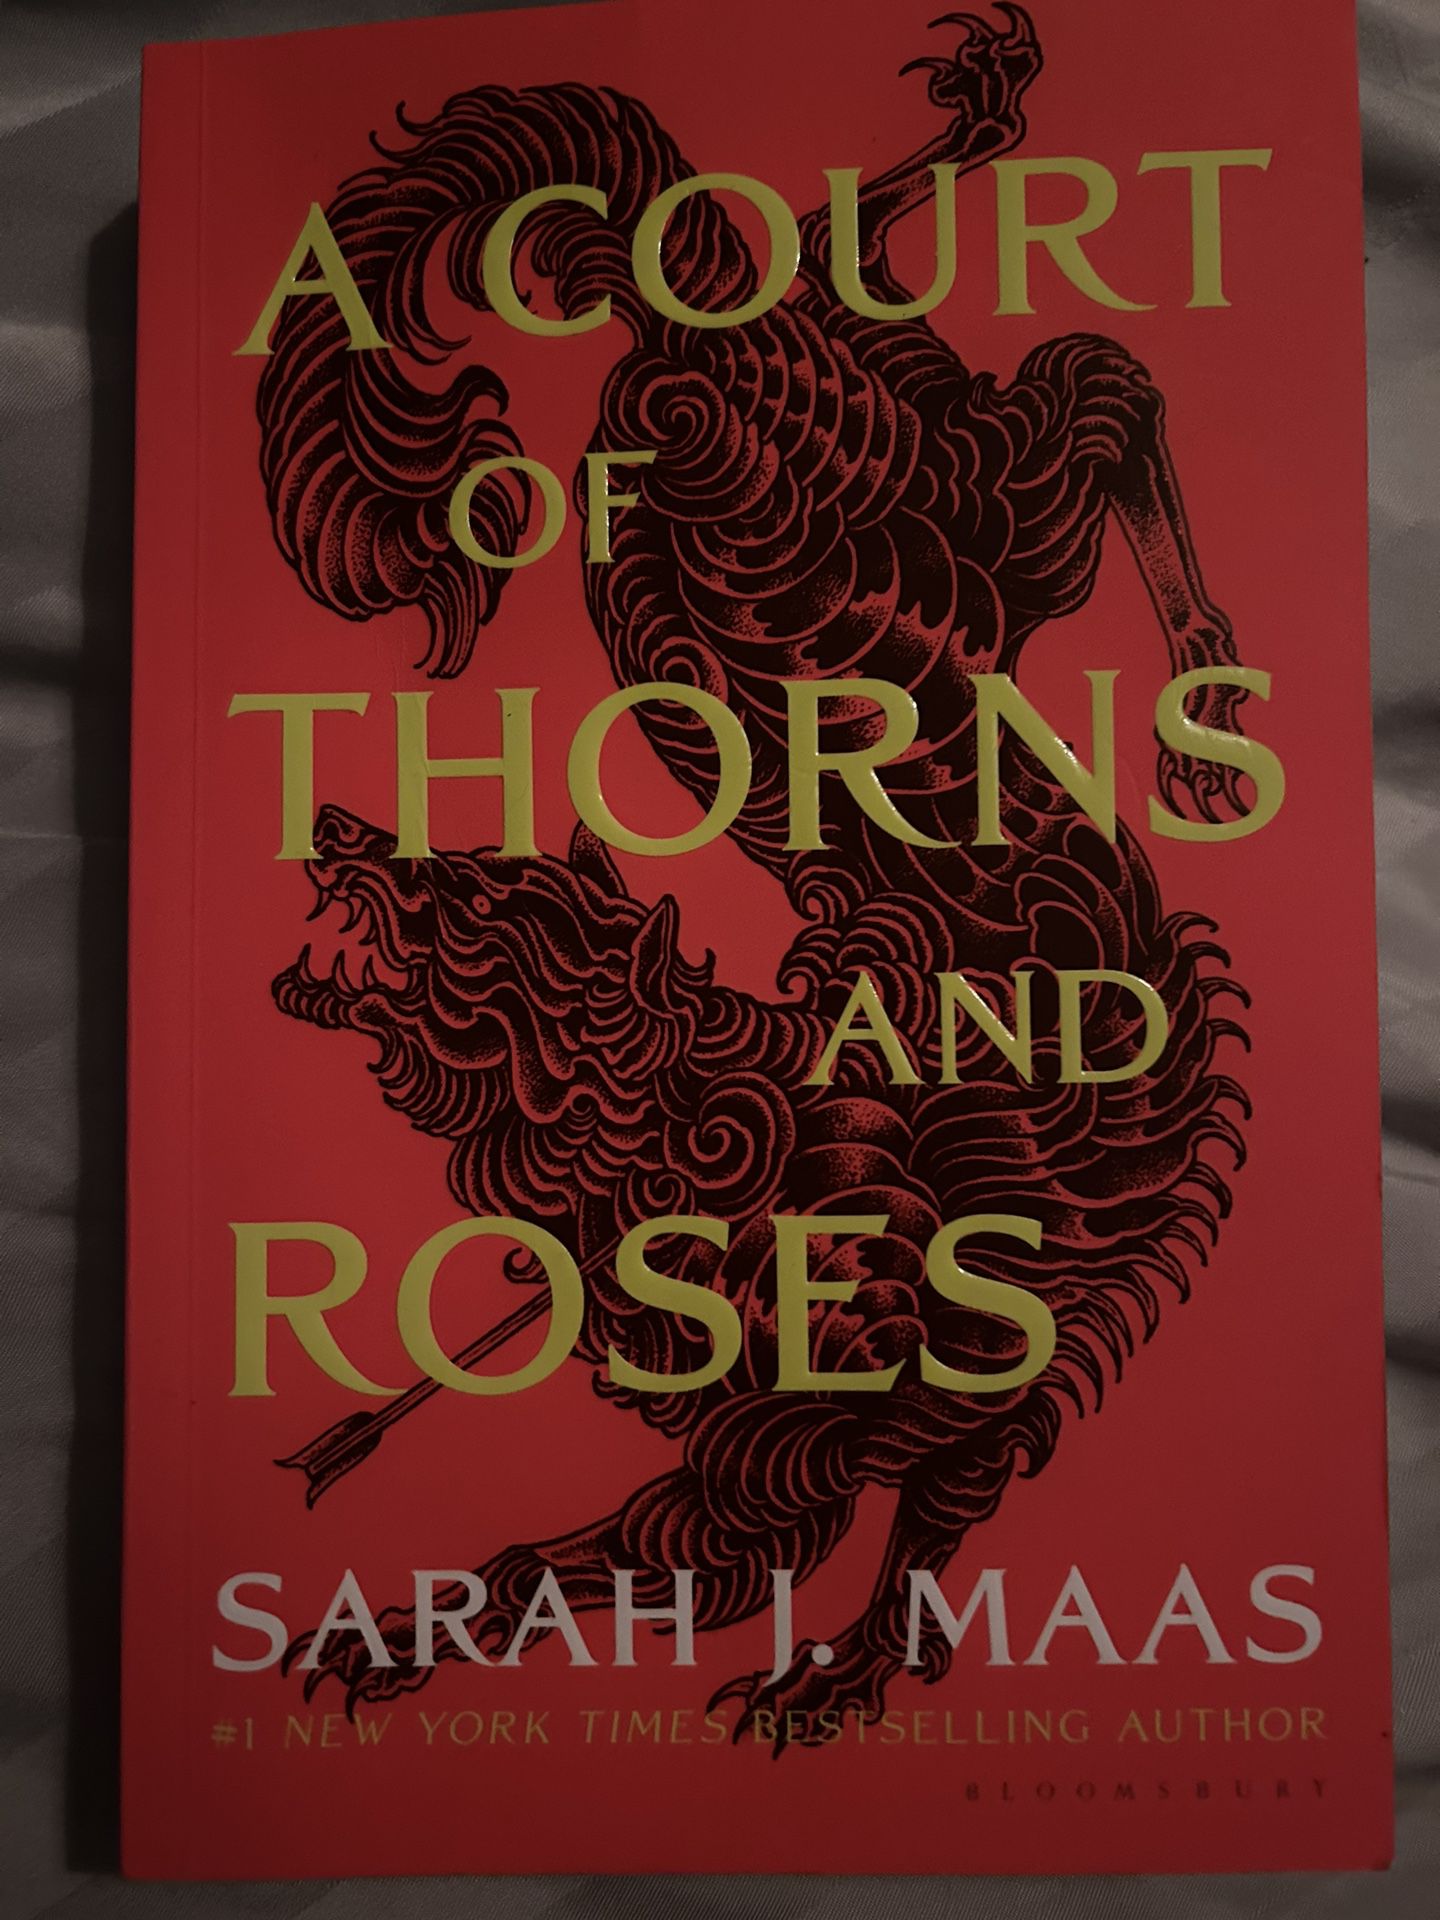 A court Of Thorns And roses